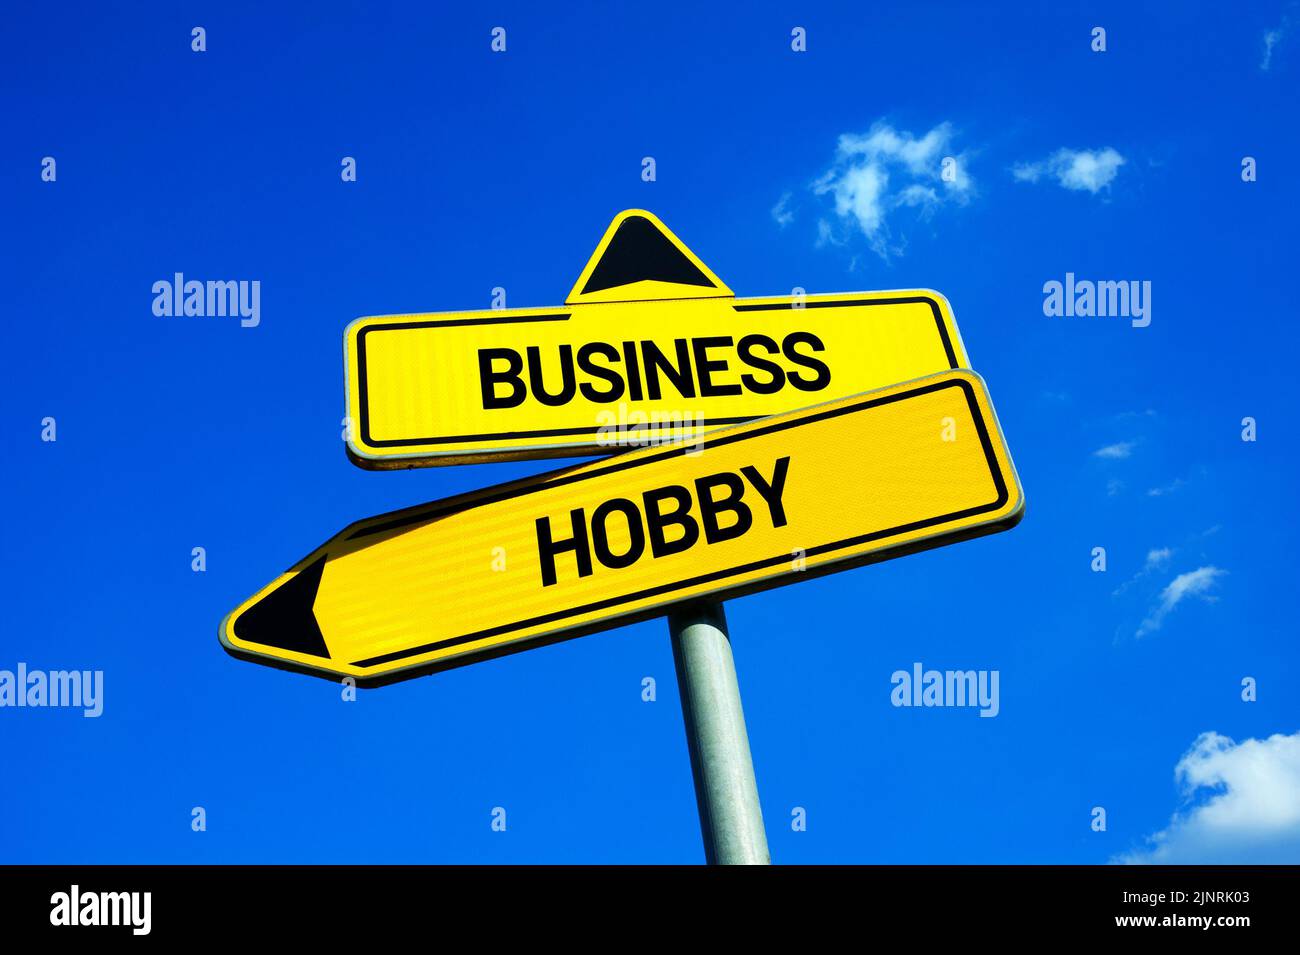 Business vs Hobby - Traffic sign with two options - entrepreneurship, job and work or activity for leisure time. Decision and choice. Stock Photo